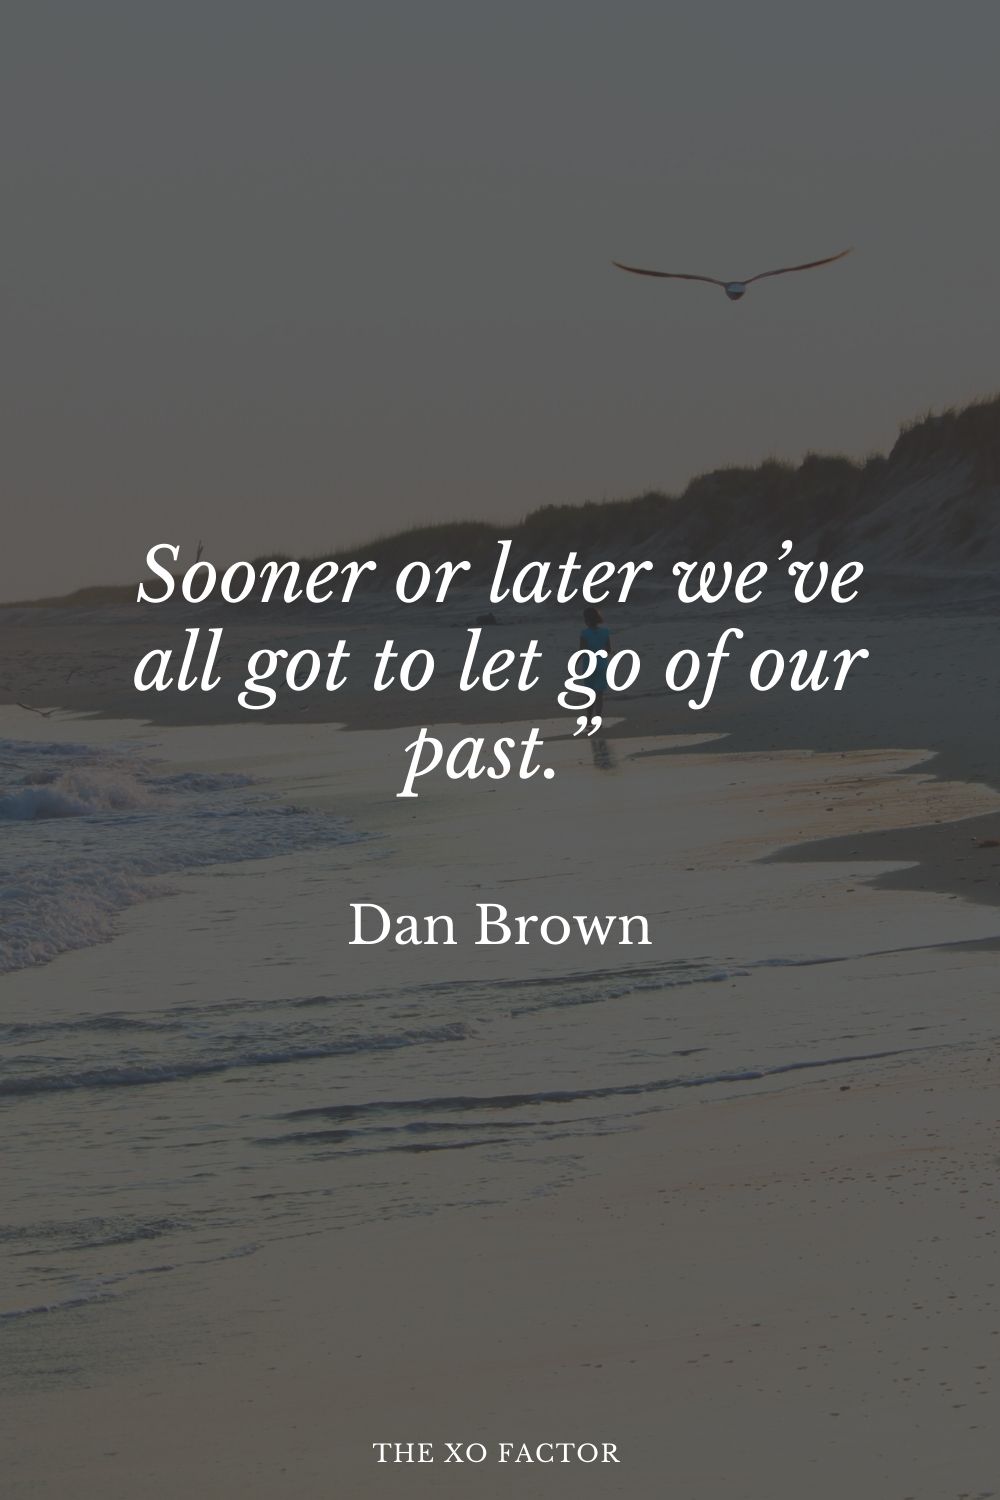 Sooner or later we’ve all got to let go of our past.” Dan Brown